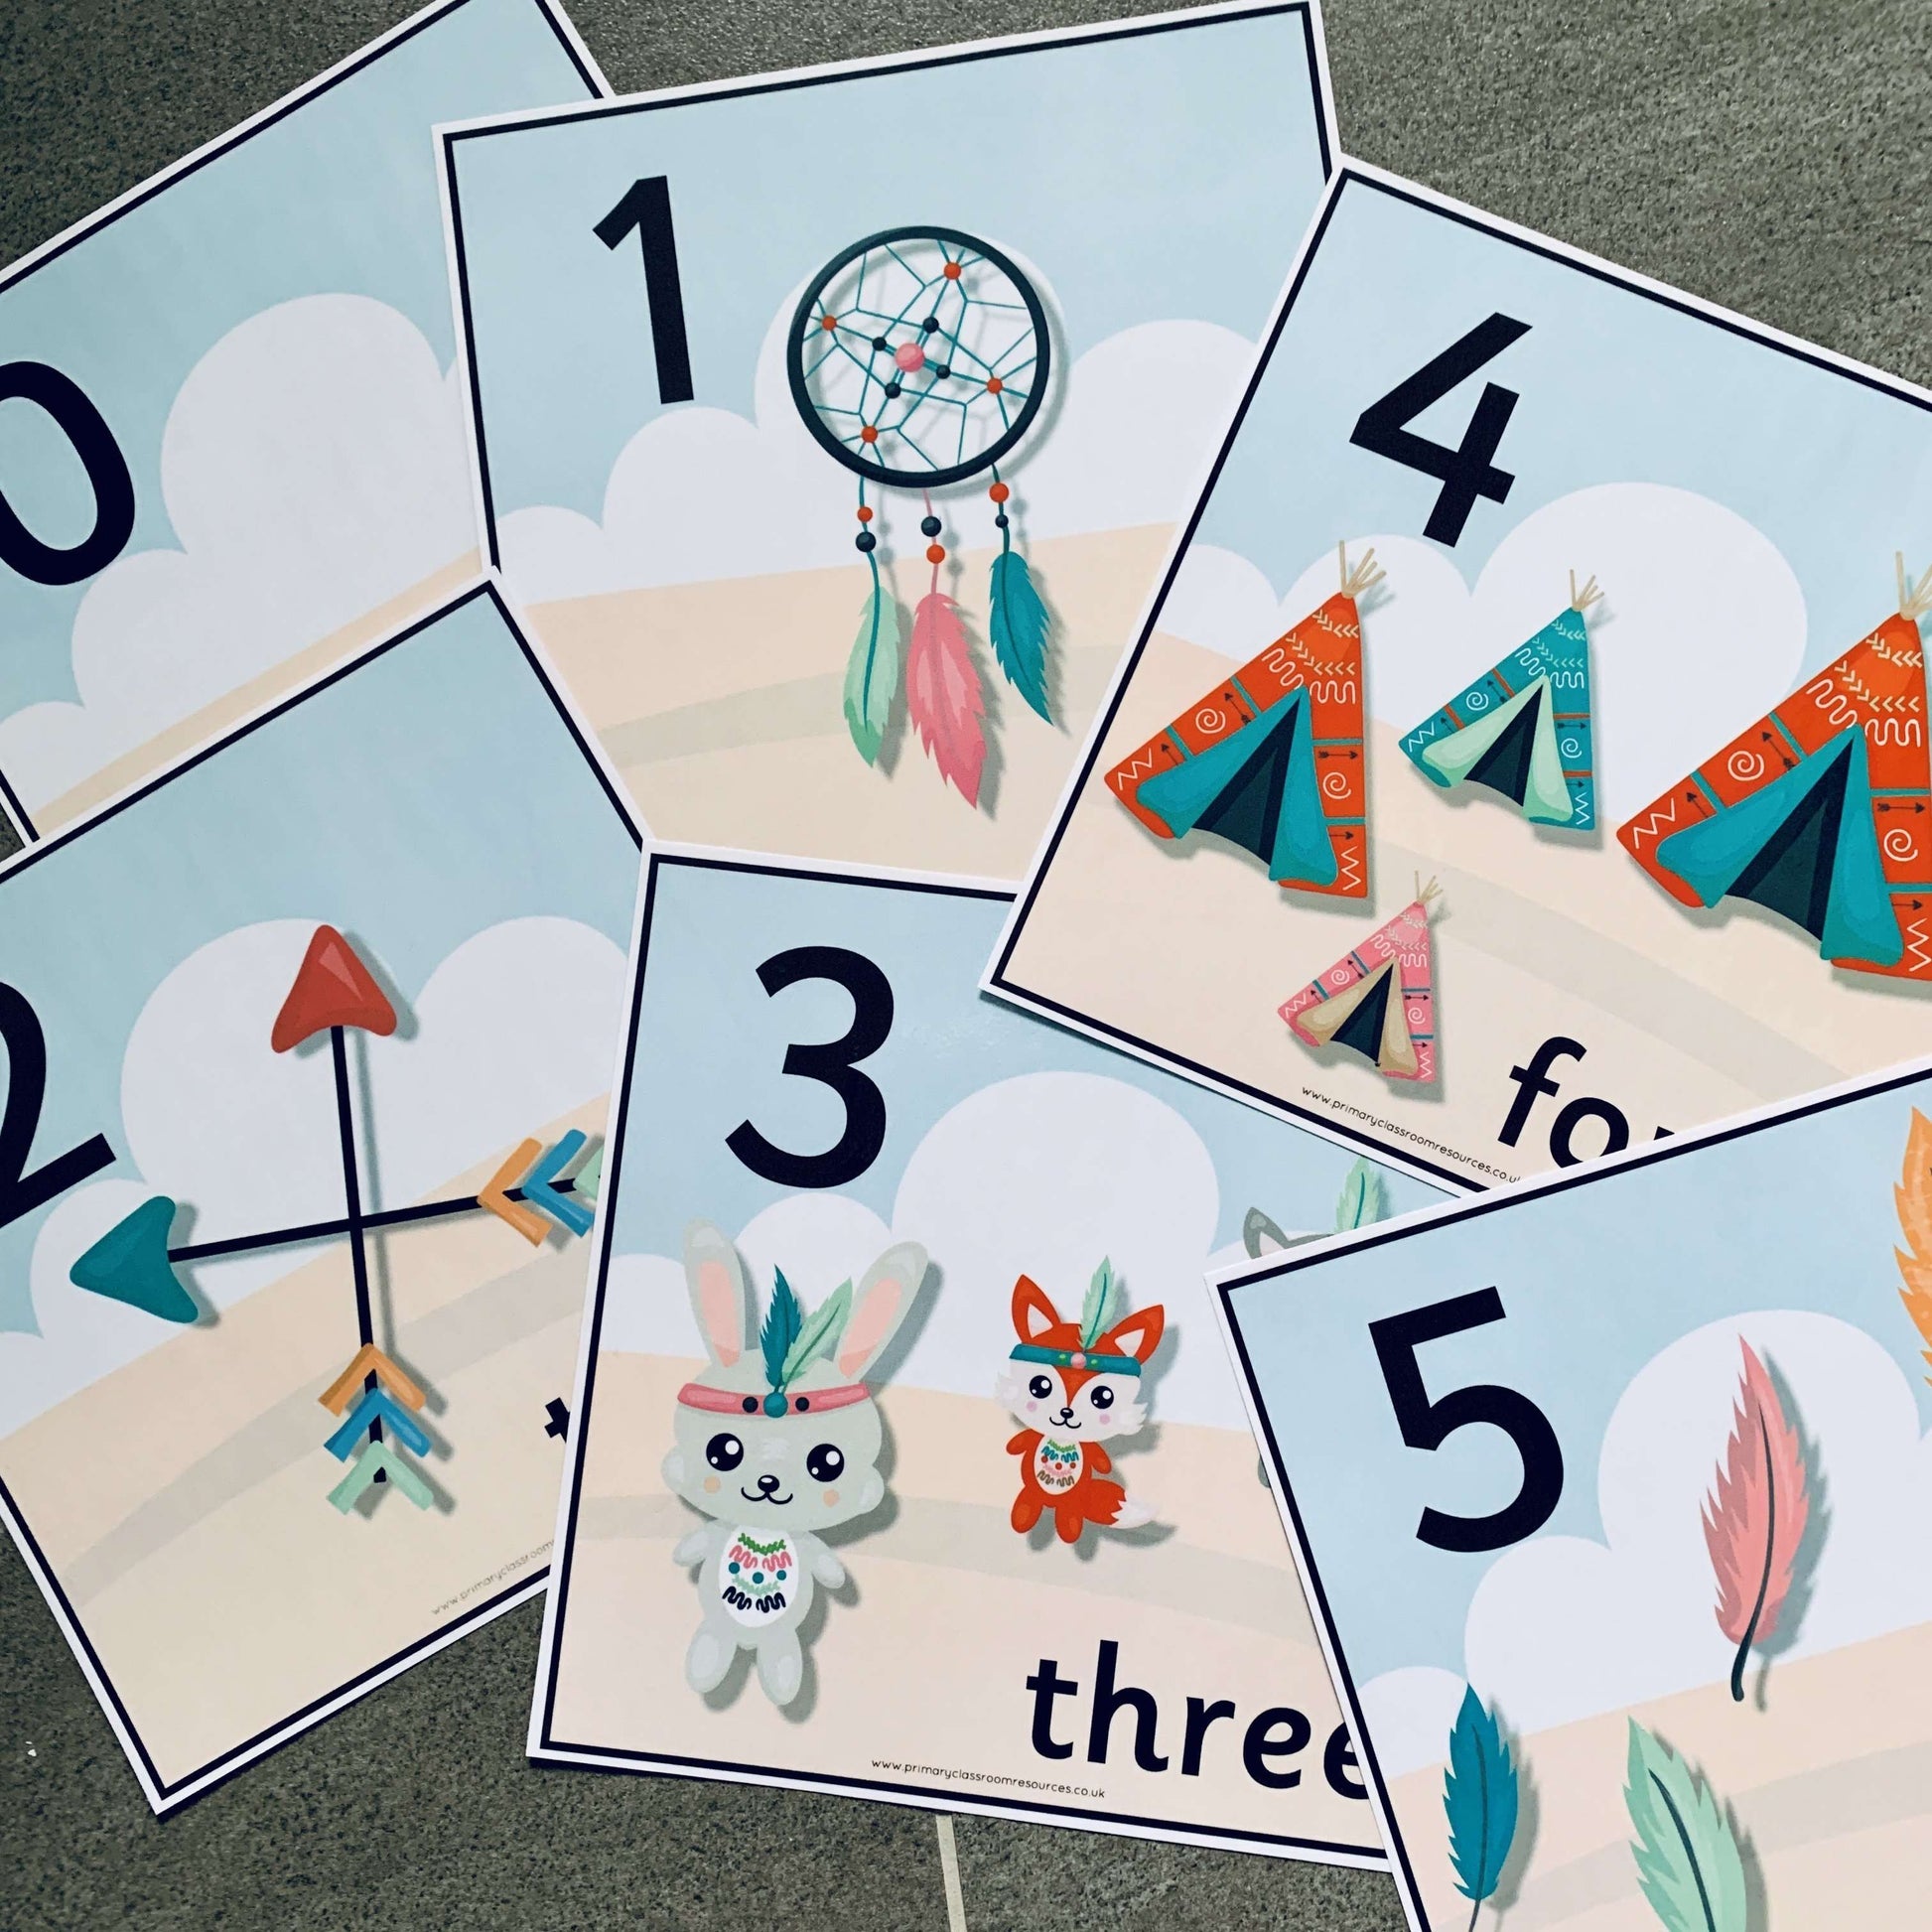 Tribal Themed Number Cards:Primary Classroom Resources